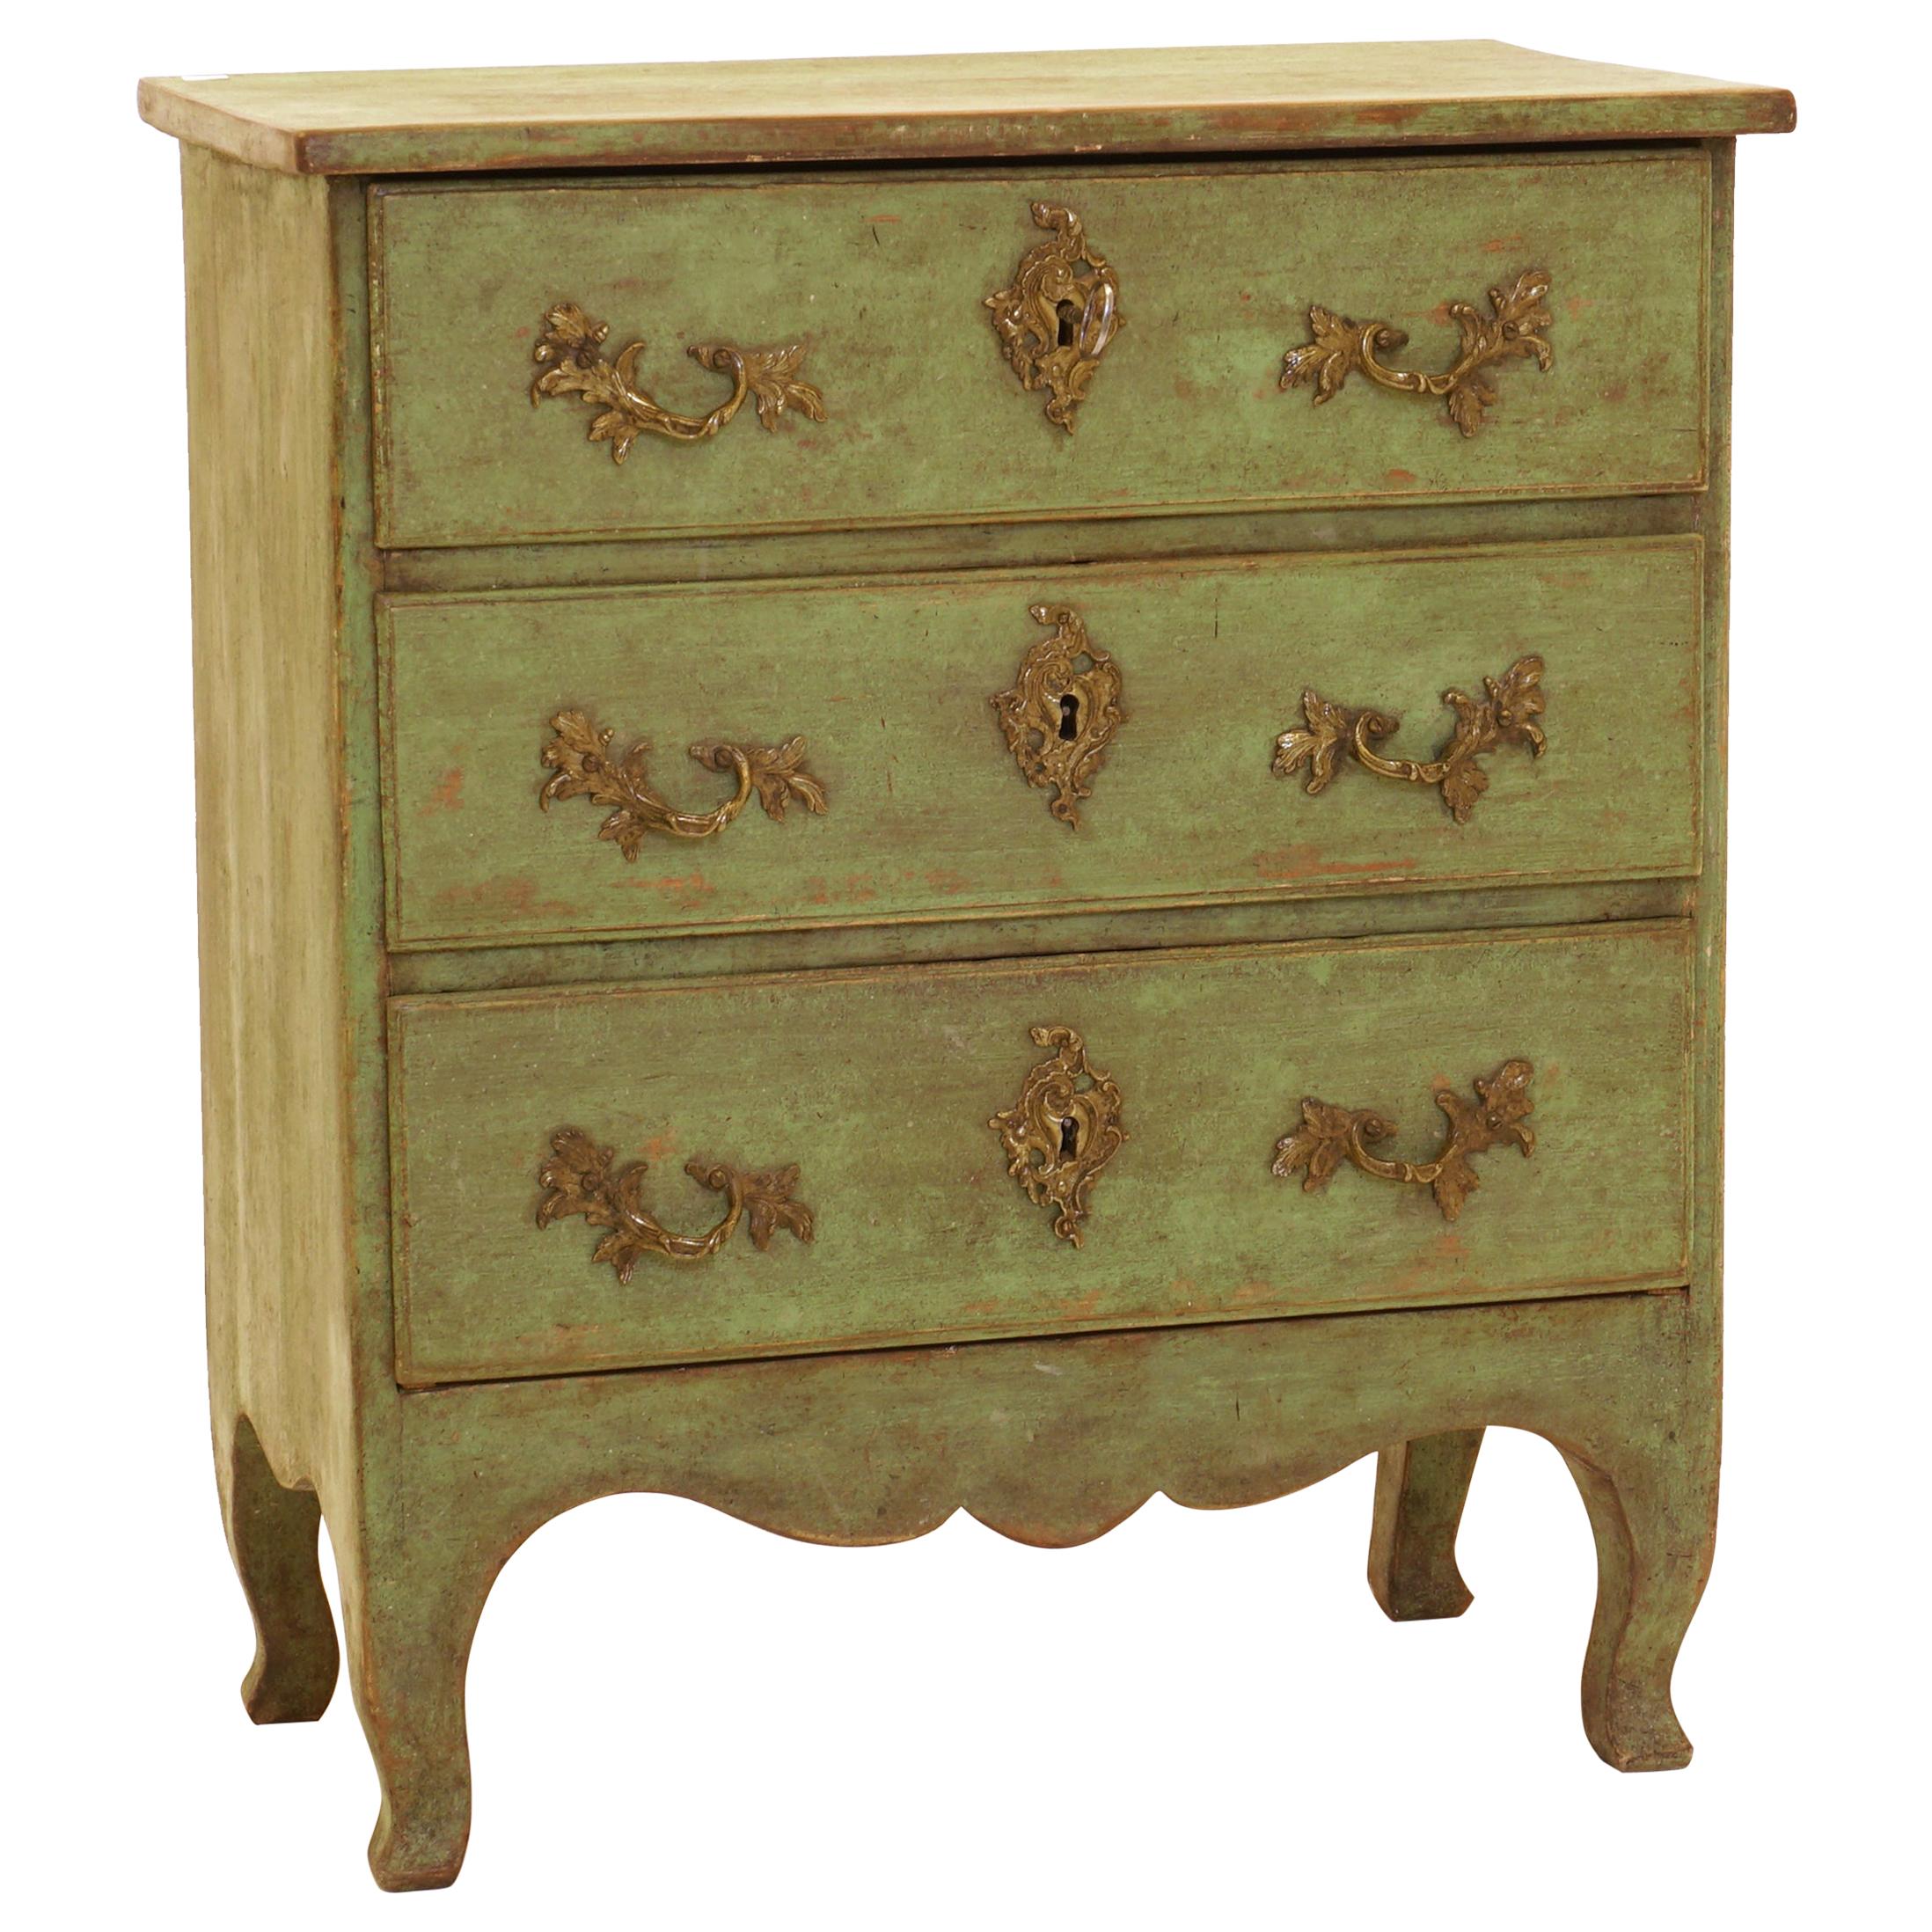 Green Decorated 18th Century Swedish Rococo Commode / Chest of Drawers For Sale